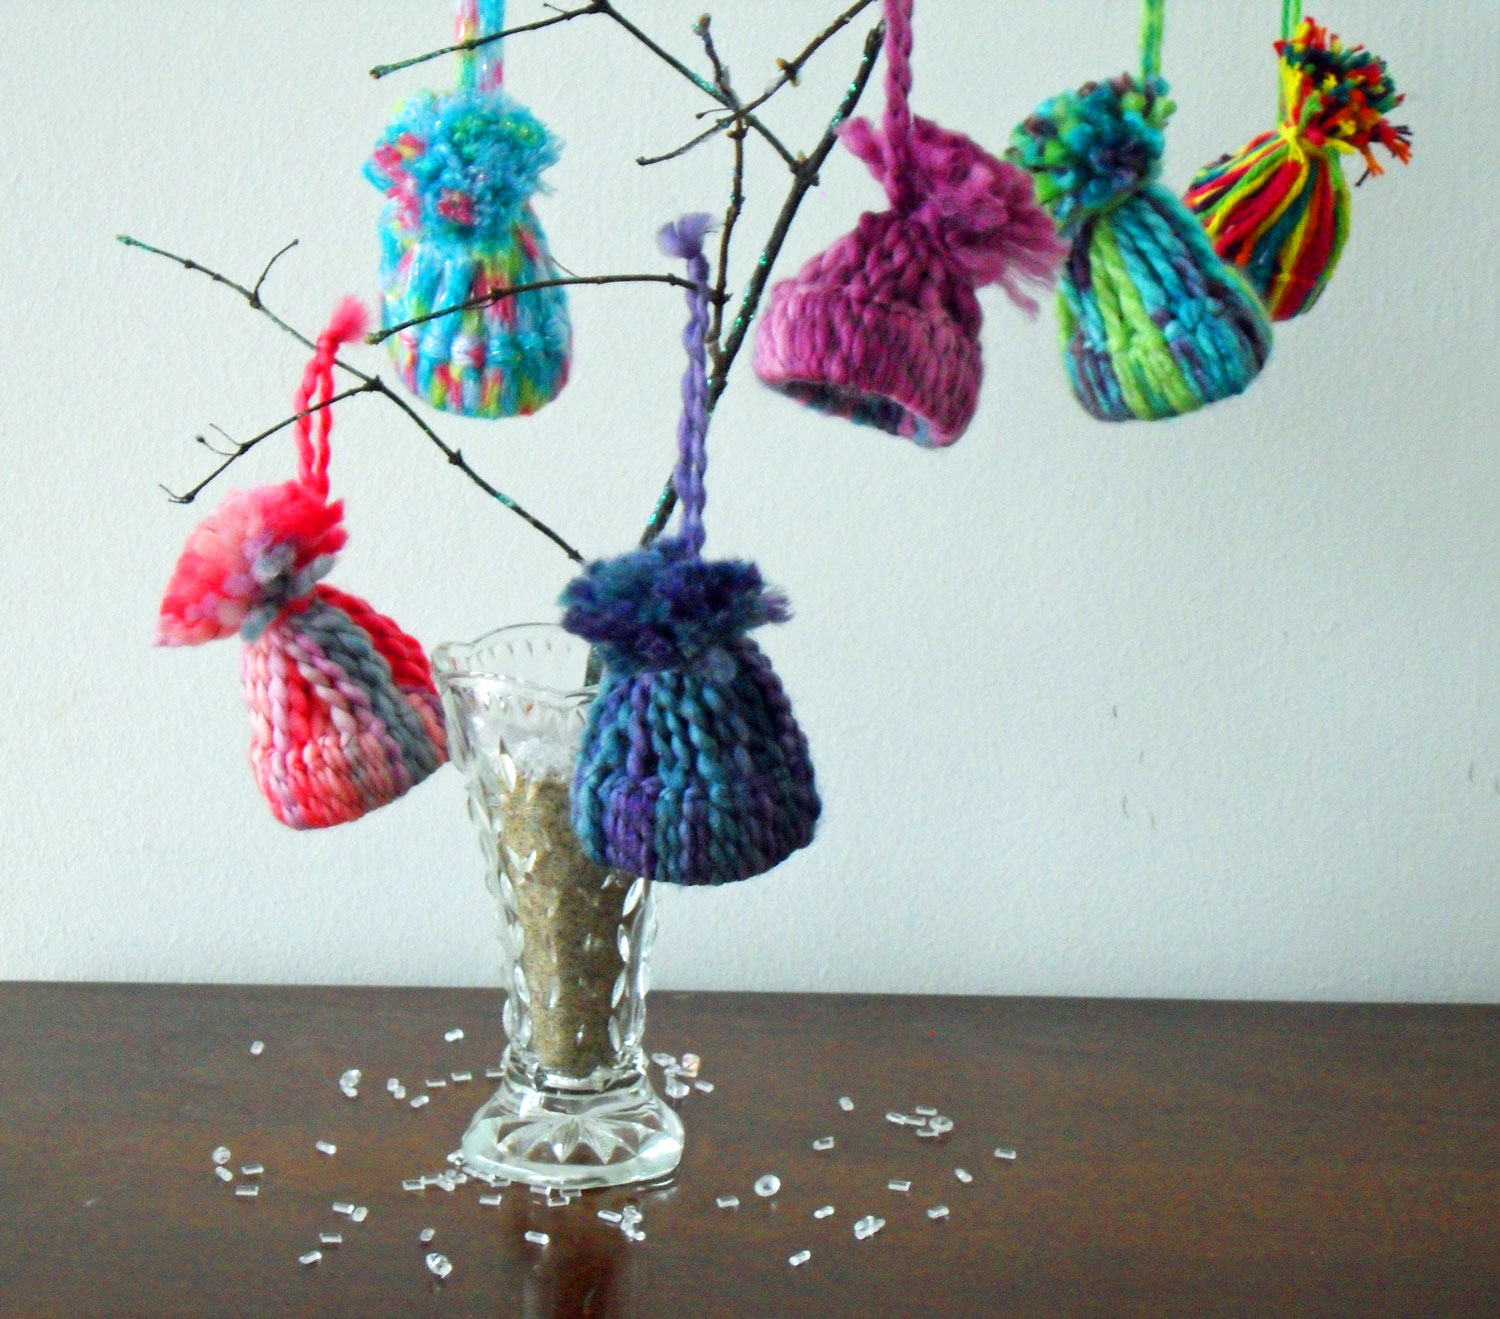 These little hats are super easy to make an only require yarn and a paper towel roll! Follow our instructions and make your own DIY gifts. | OrnamentShop.com